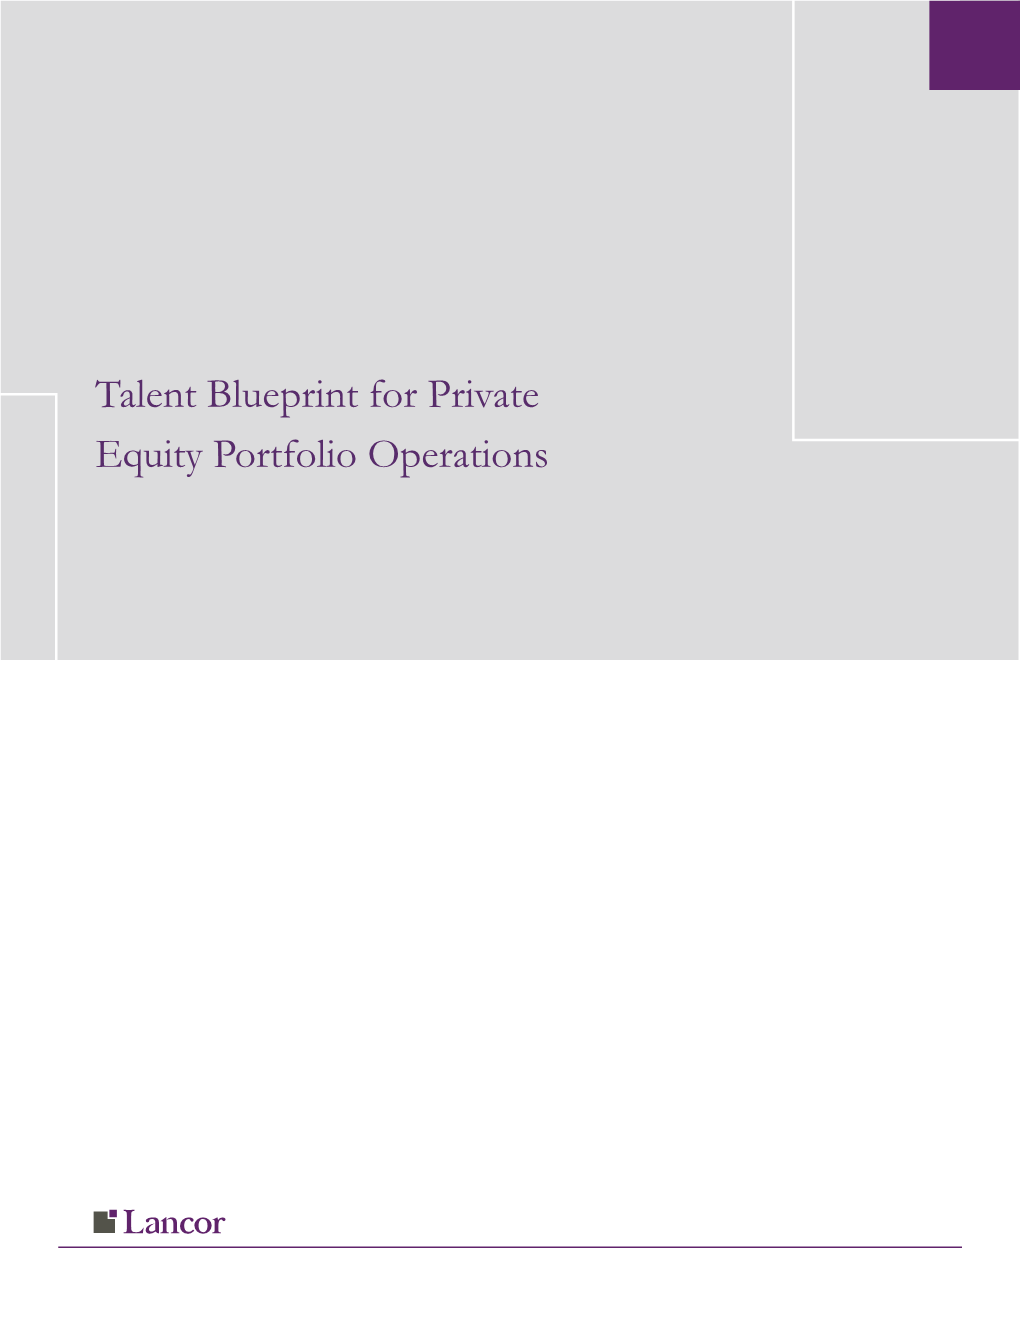 Talent Blueprint for Private Equity Portfolio Operations